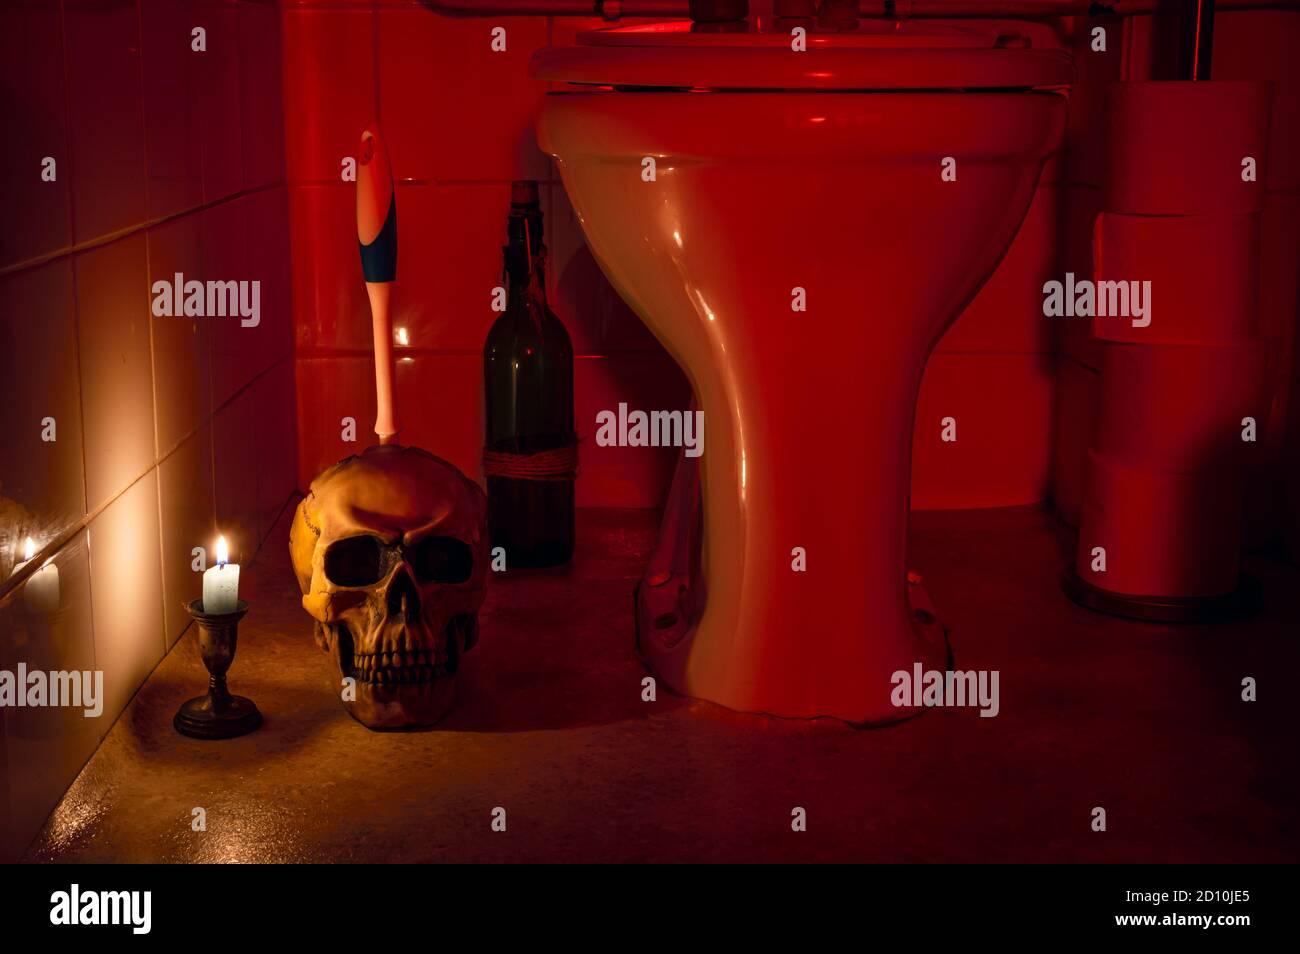 Halloween restroom scene with a skull toilet brush holder and toilet. Scene is lit by candle light and daylight lamp with a red gel. Stock Photo